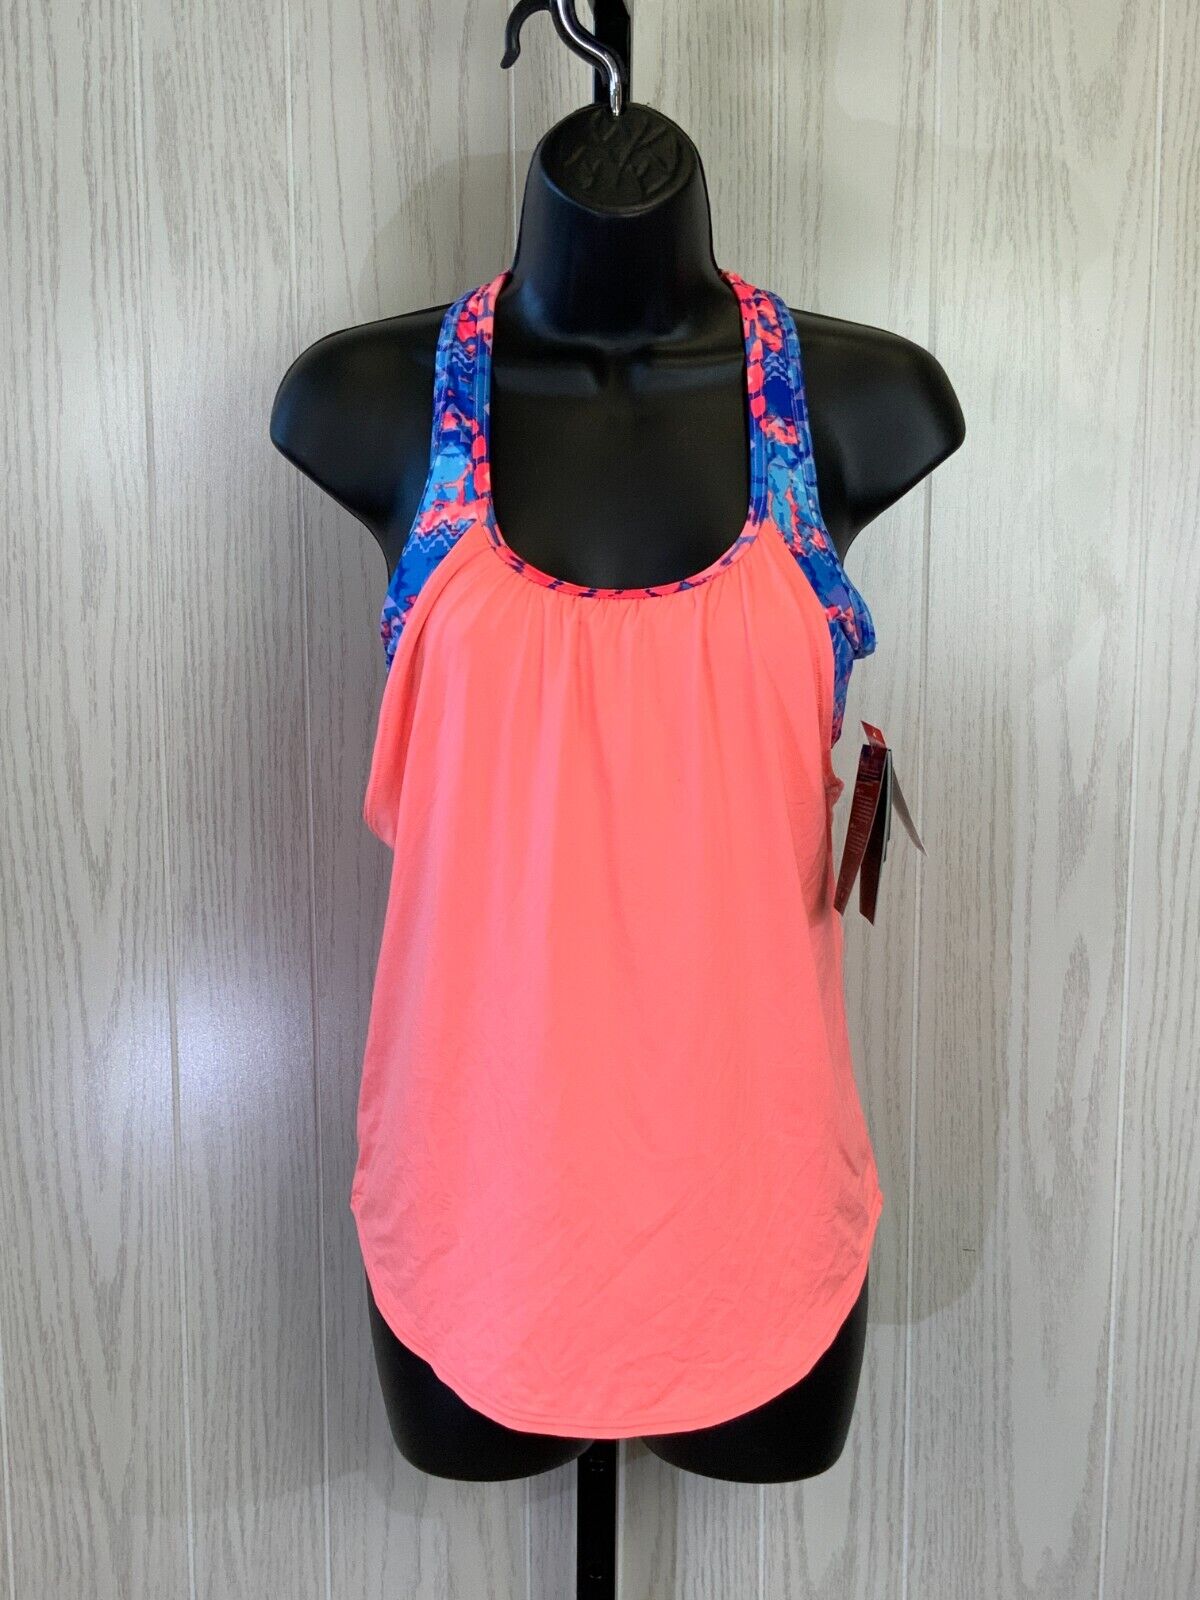 TYR Emerald Lake 2 in 1 Tankini Top, Women's Size S, Coral/Blue NEW MSRP $39.99